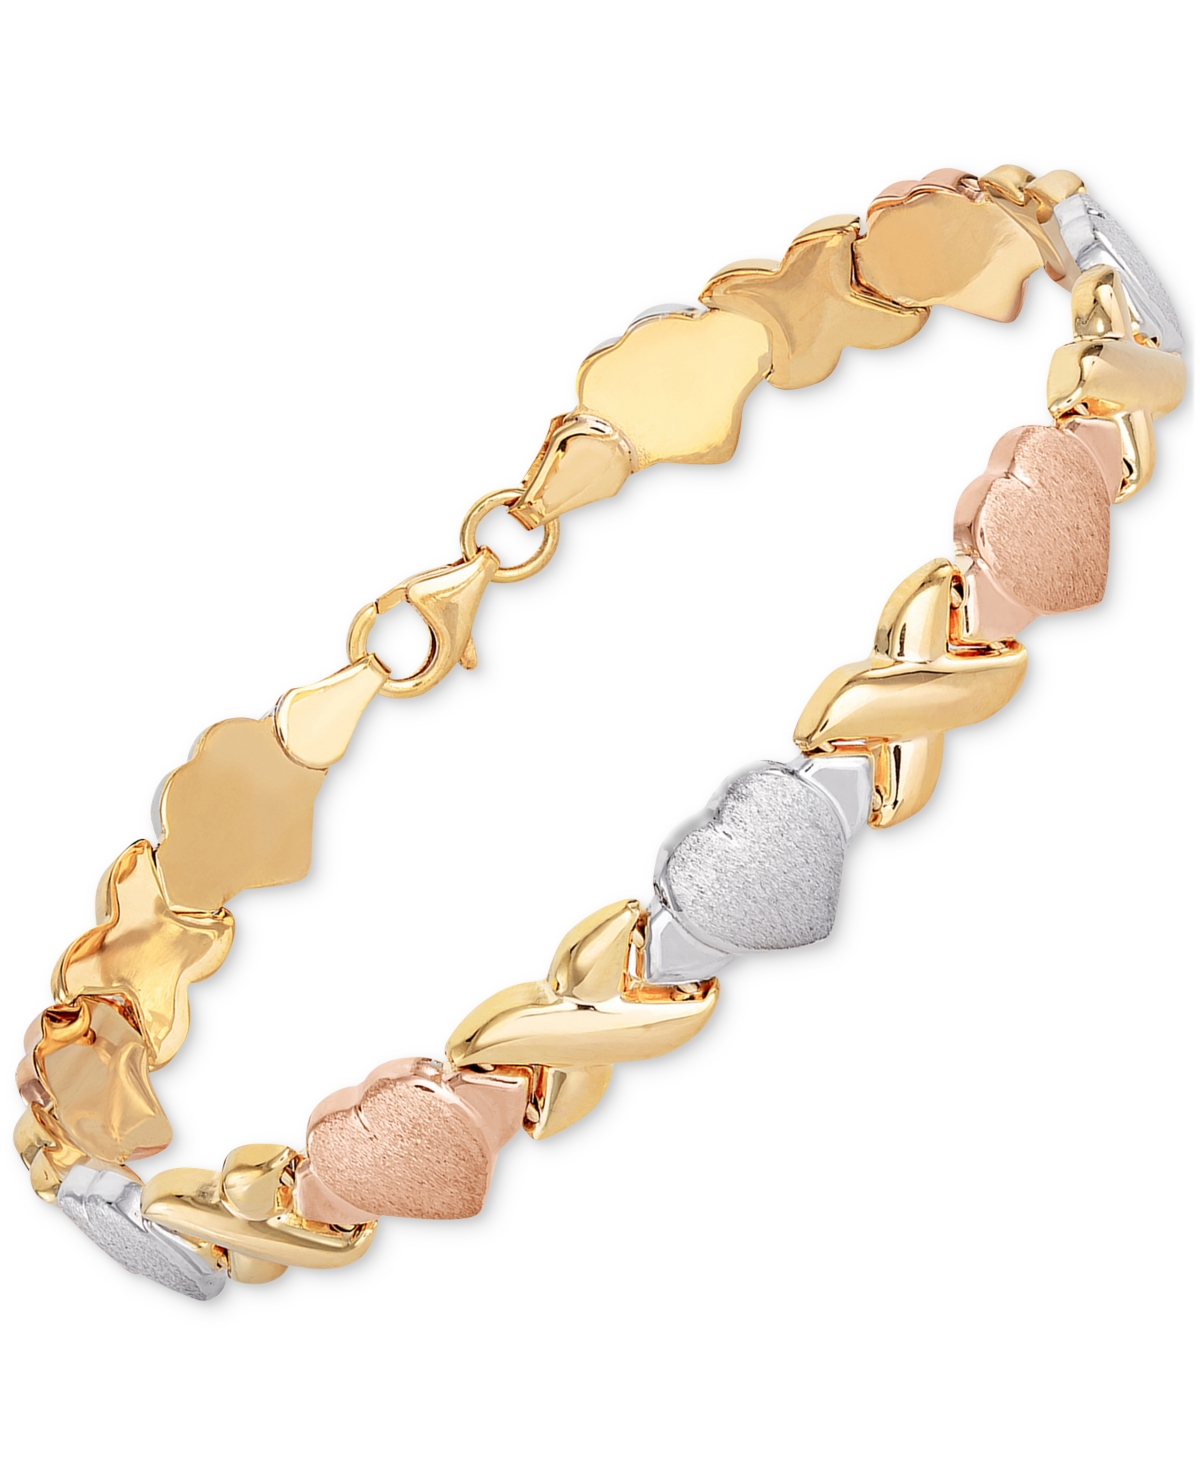 GIANI BERNINI HEARTS & KISSES LINK BRACELET IN 18K TRI-COLOR GOLD-PLATED STERLING SILVER, CREATED FOR MACY'S (ALSO